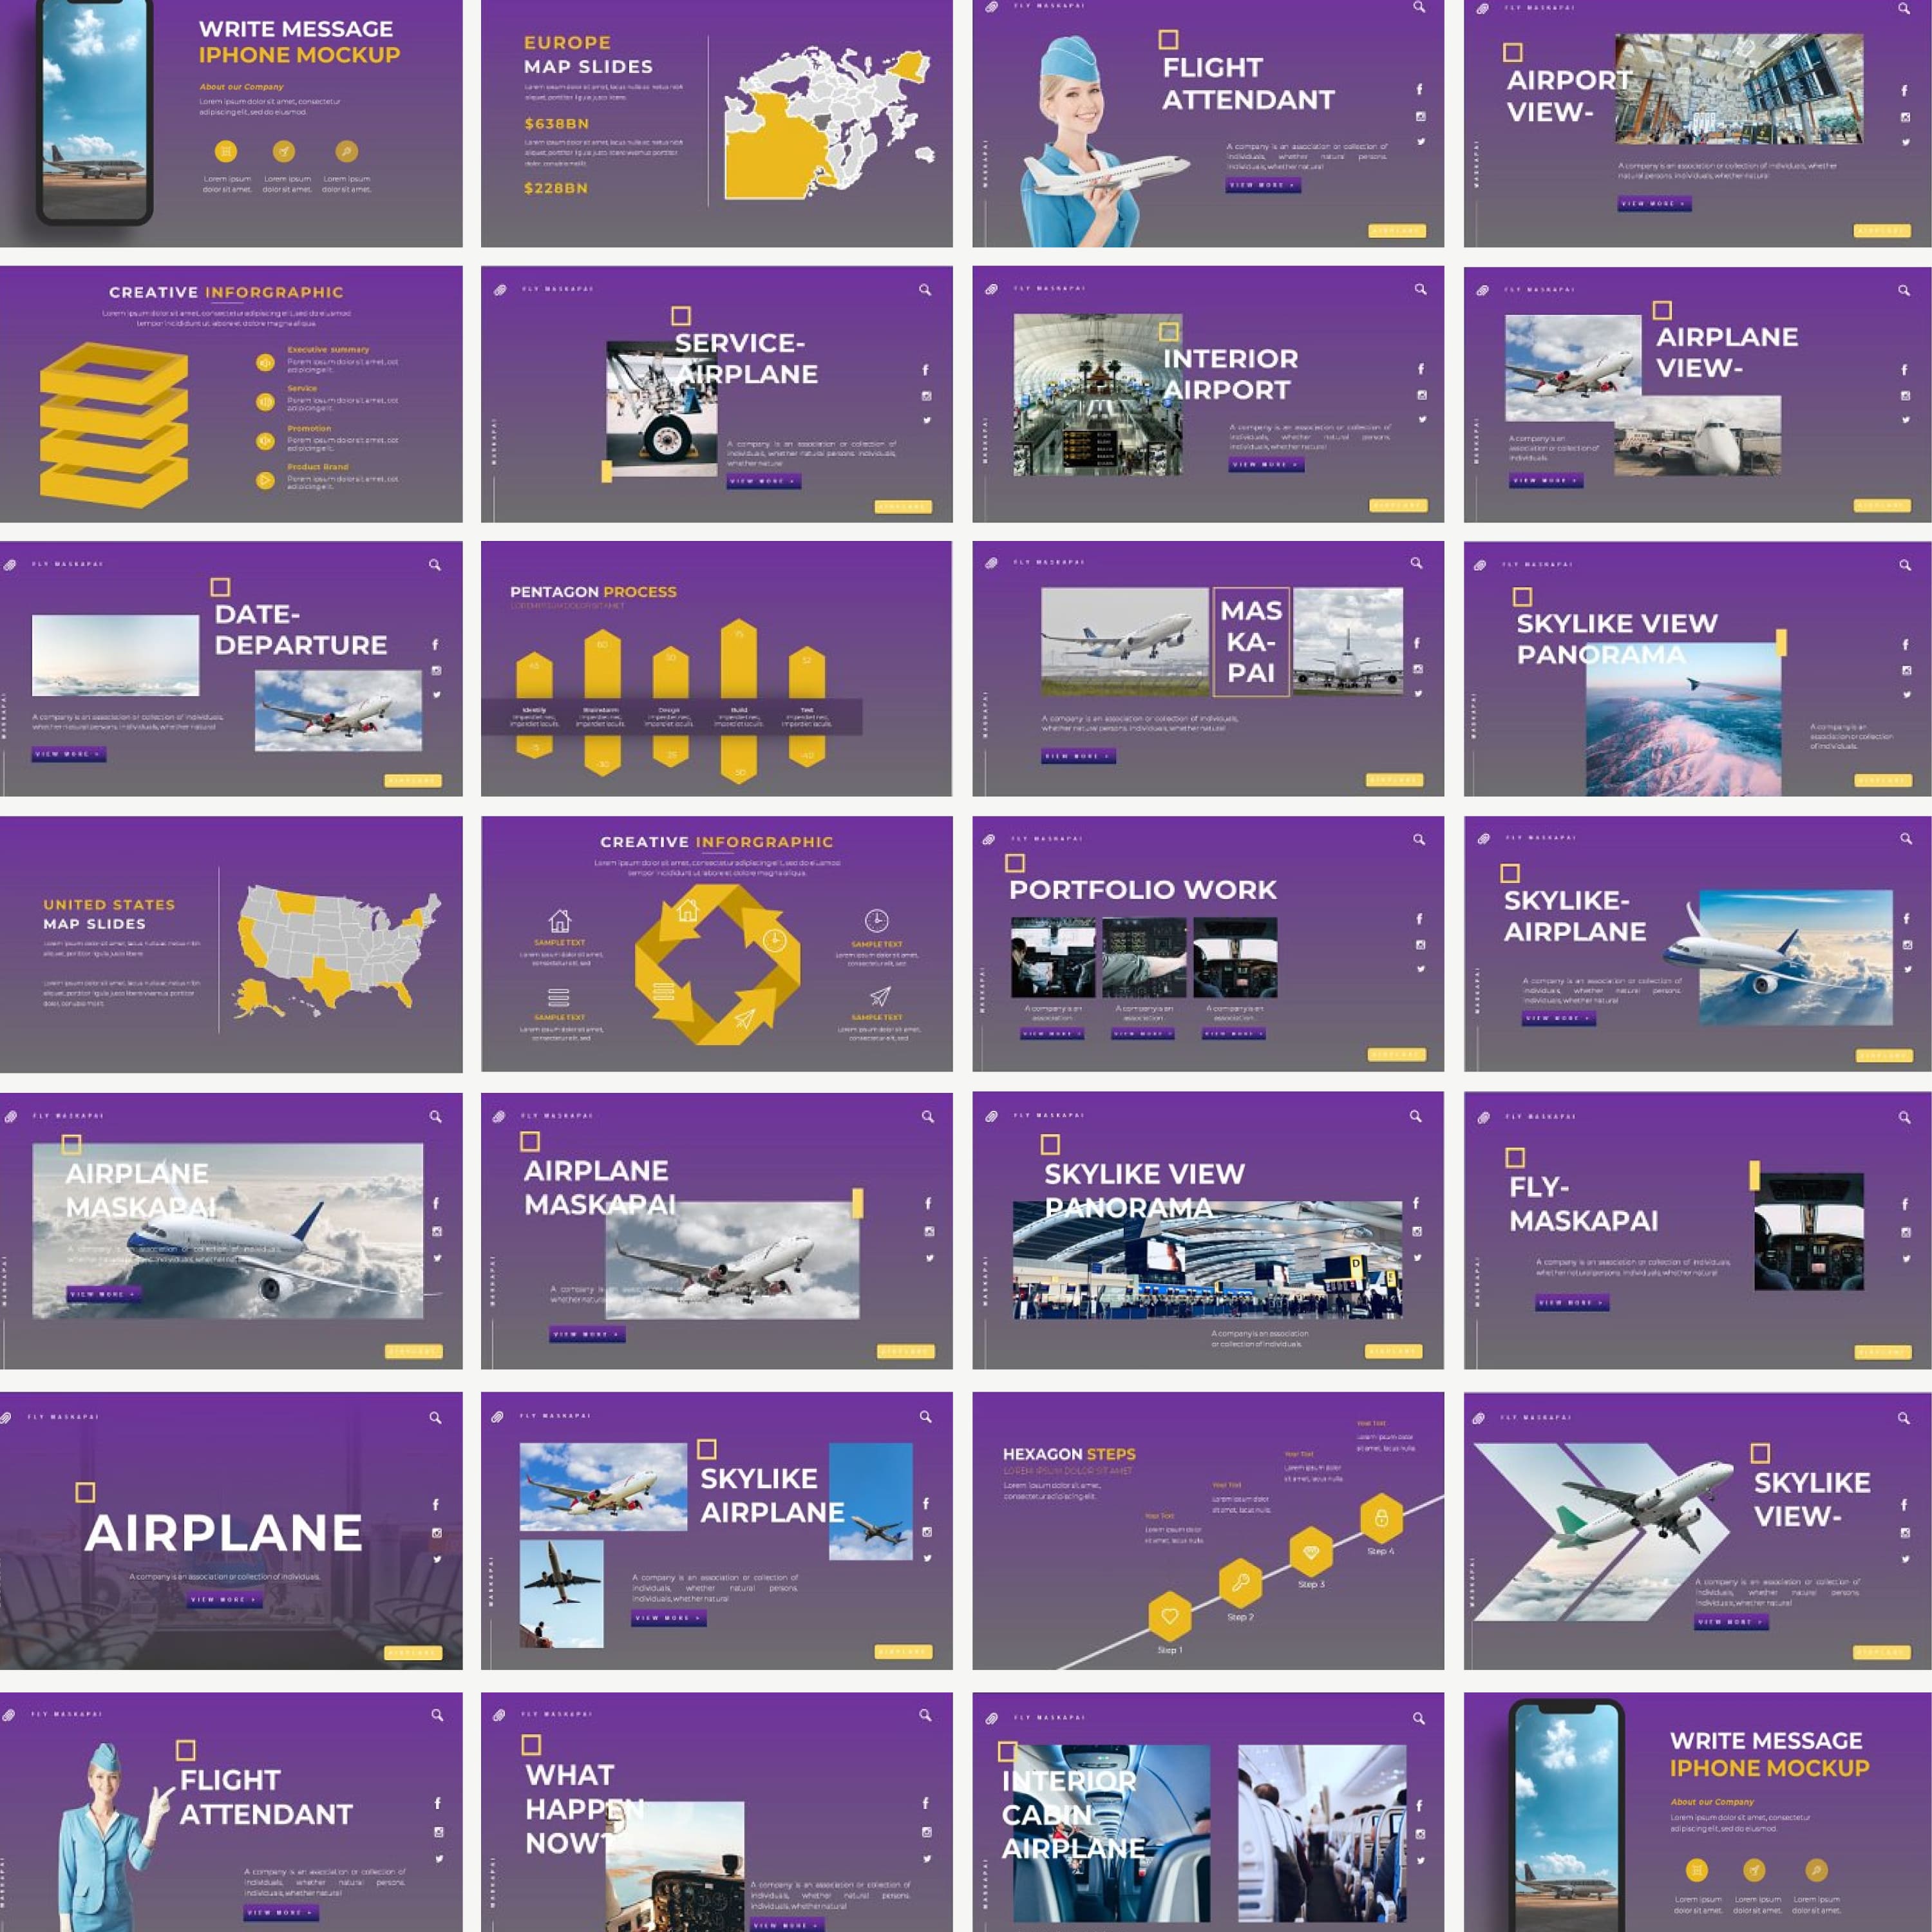 Maskapai airline powerpoint created by Barland Design.